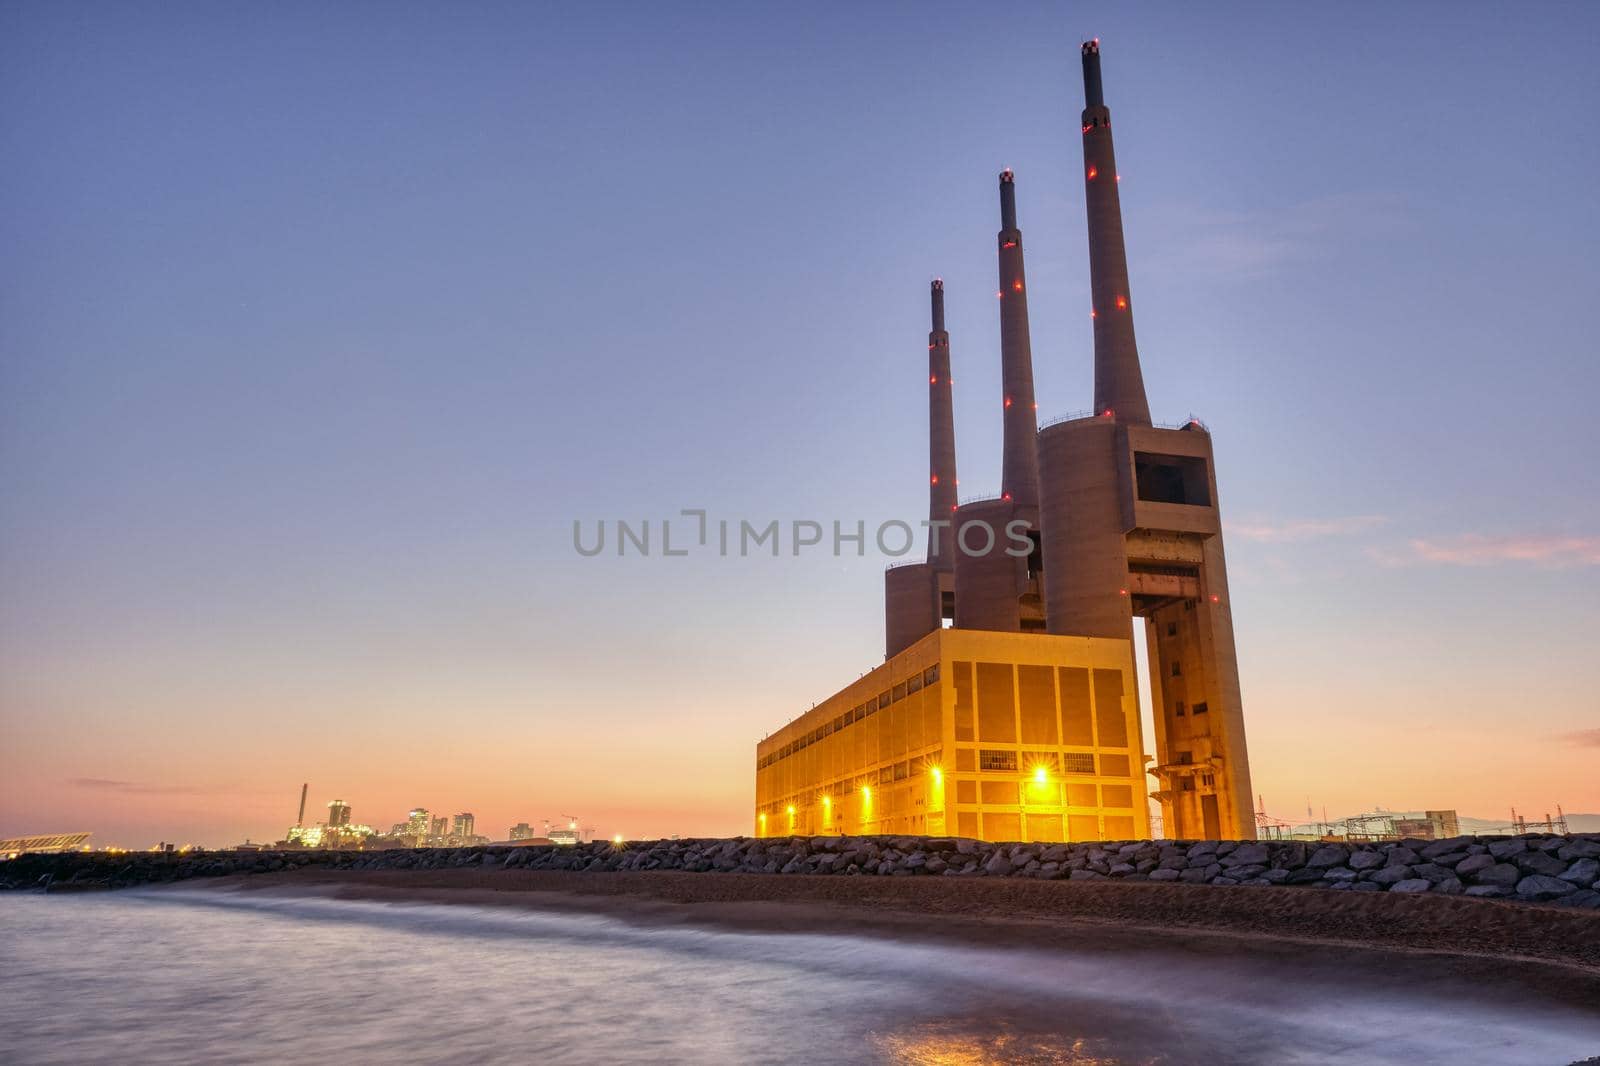 The shut-down thermal power station at Sant Adria by elxeneize